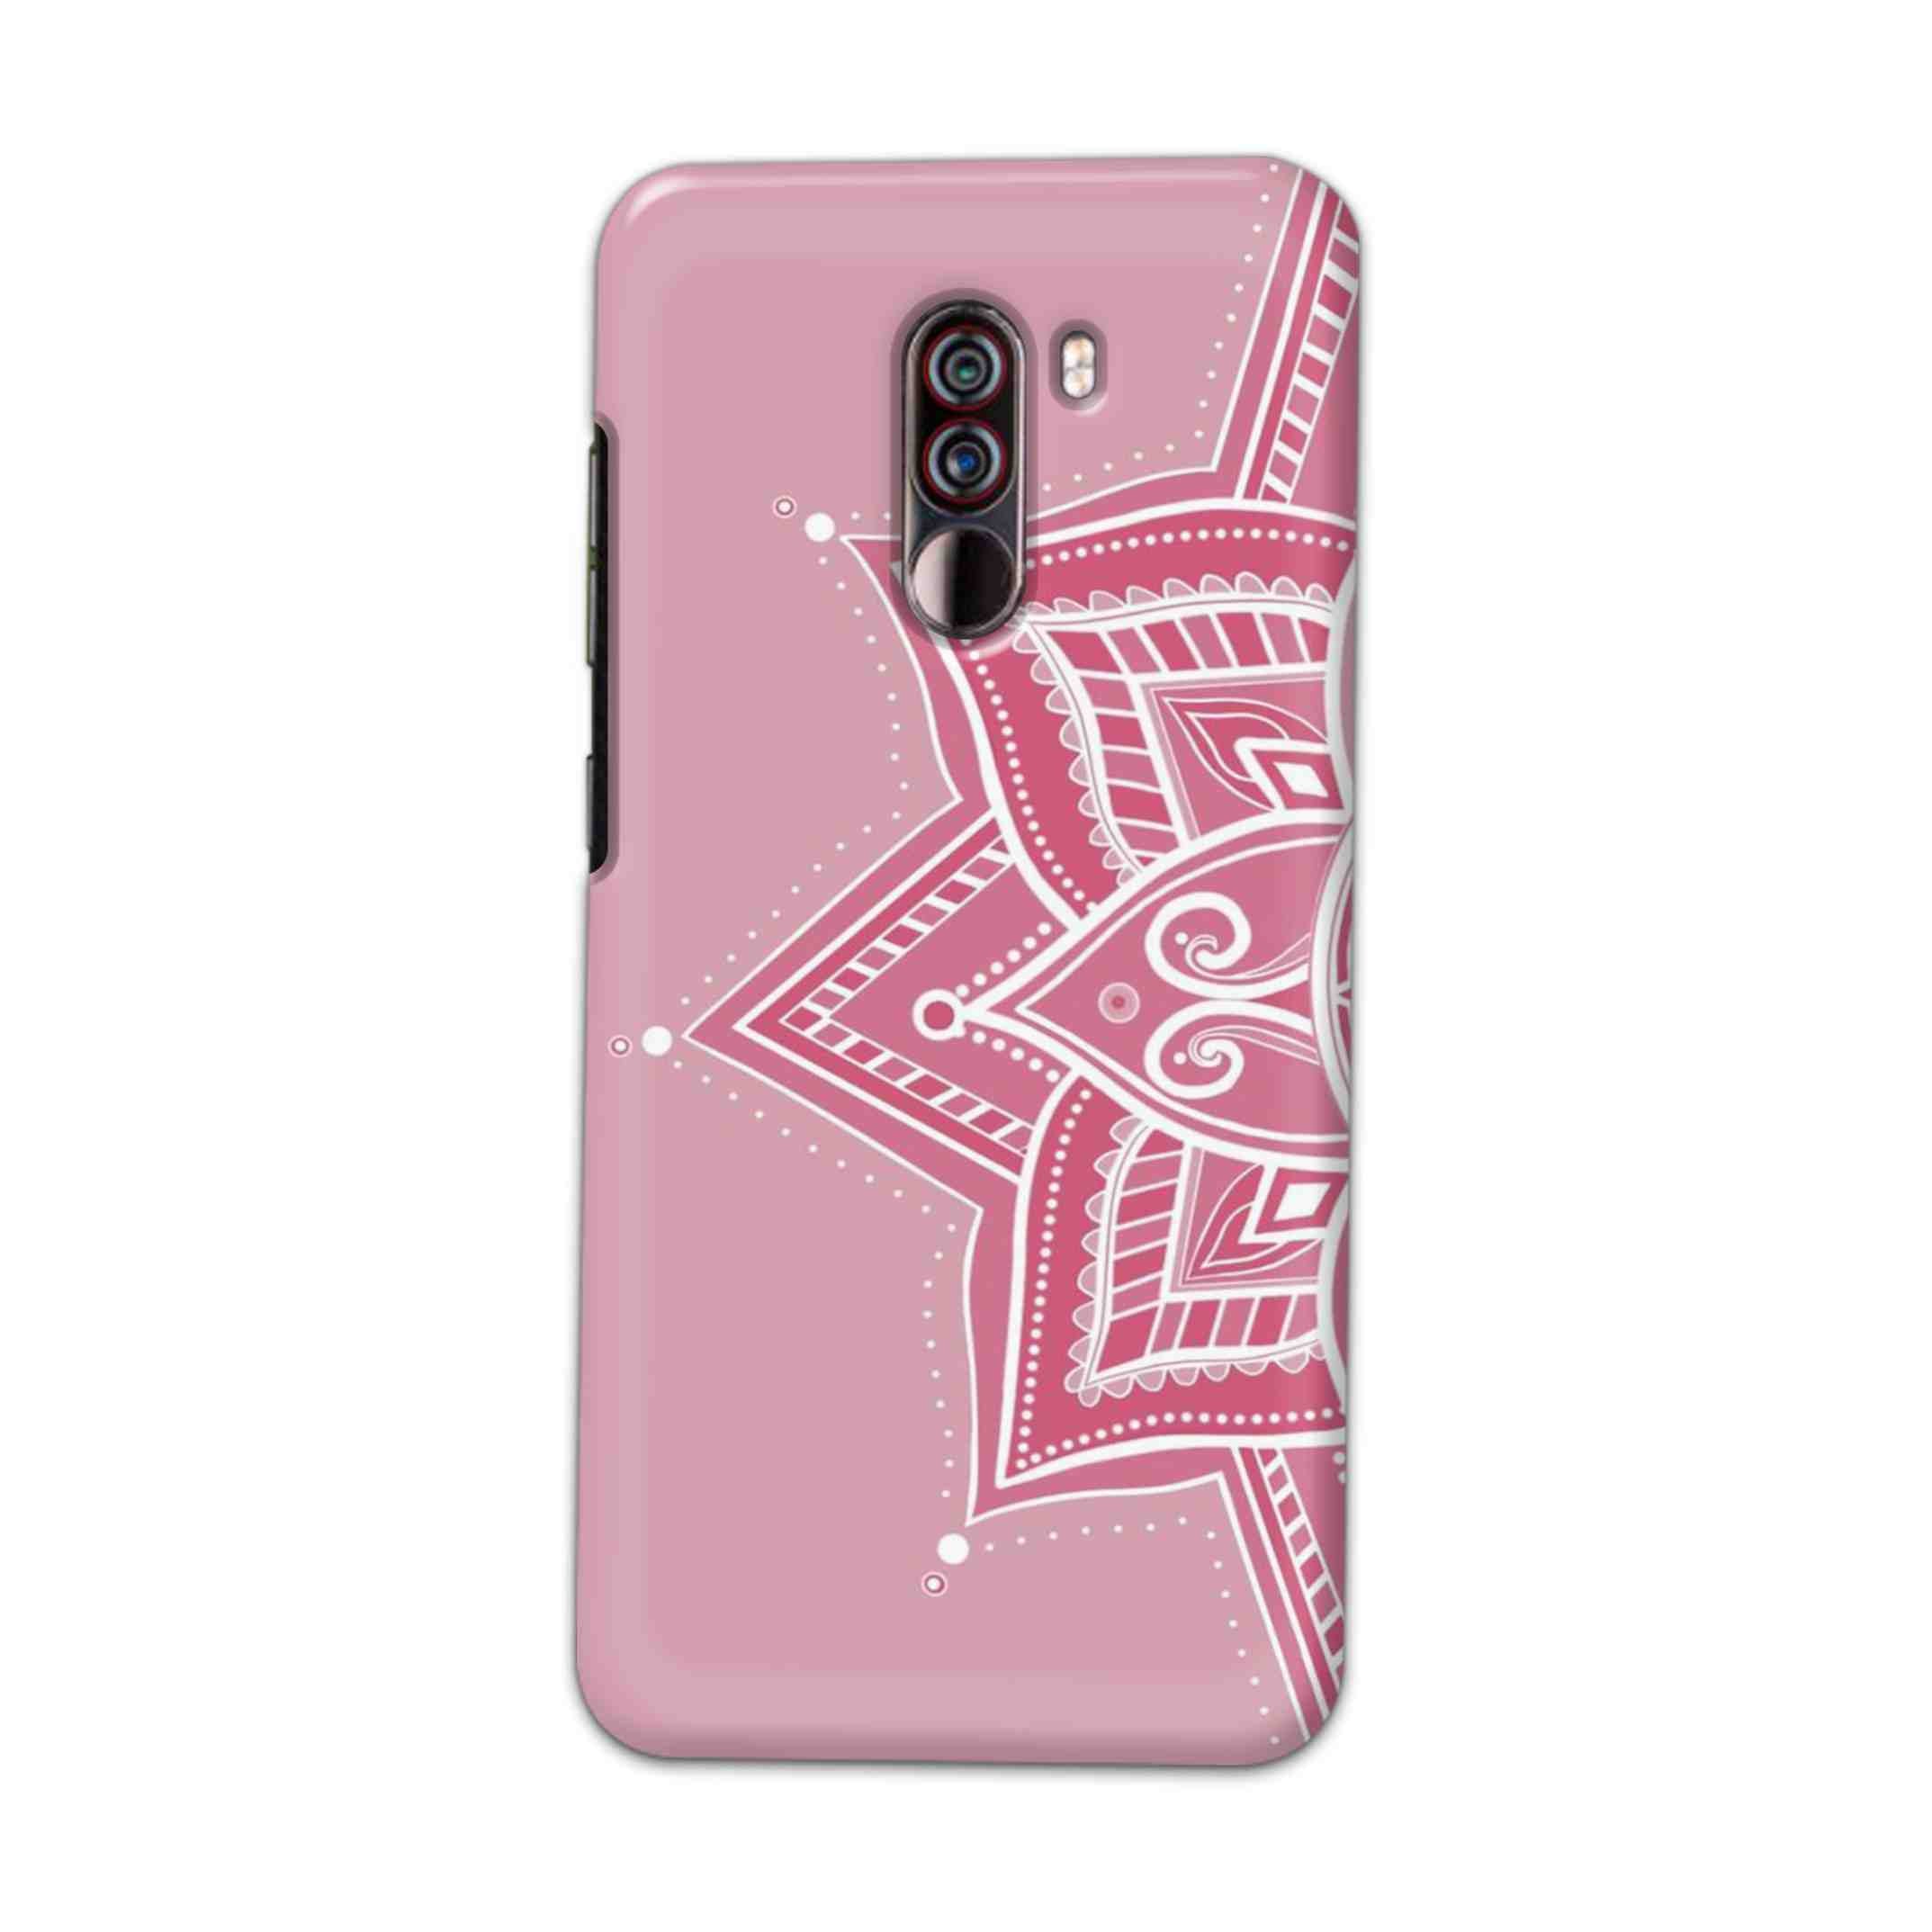 Buy Pink Rangoli Hard Back Mobile Phone Case Cover For Xiaomi Pocophone F1 Online